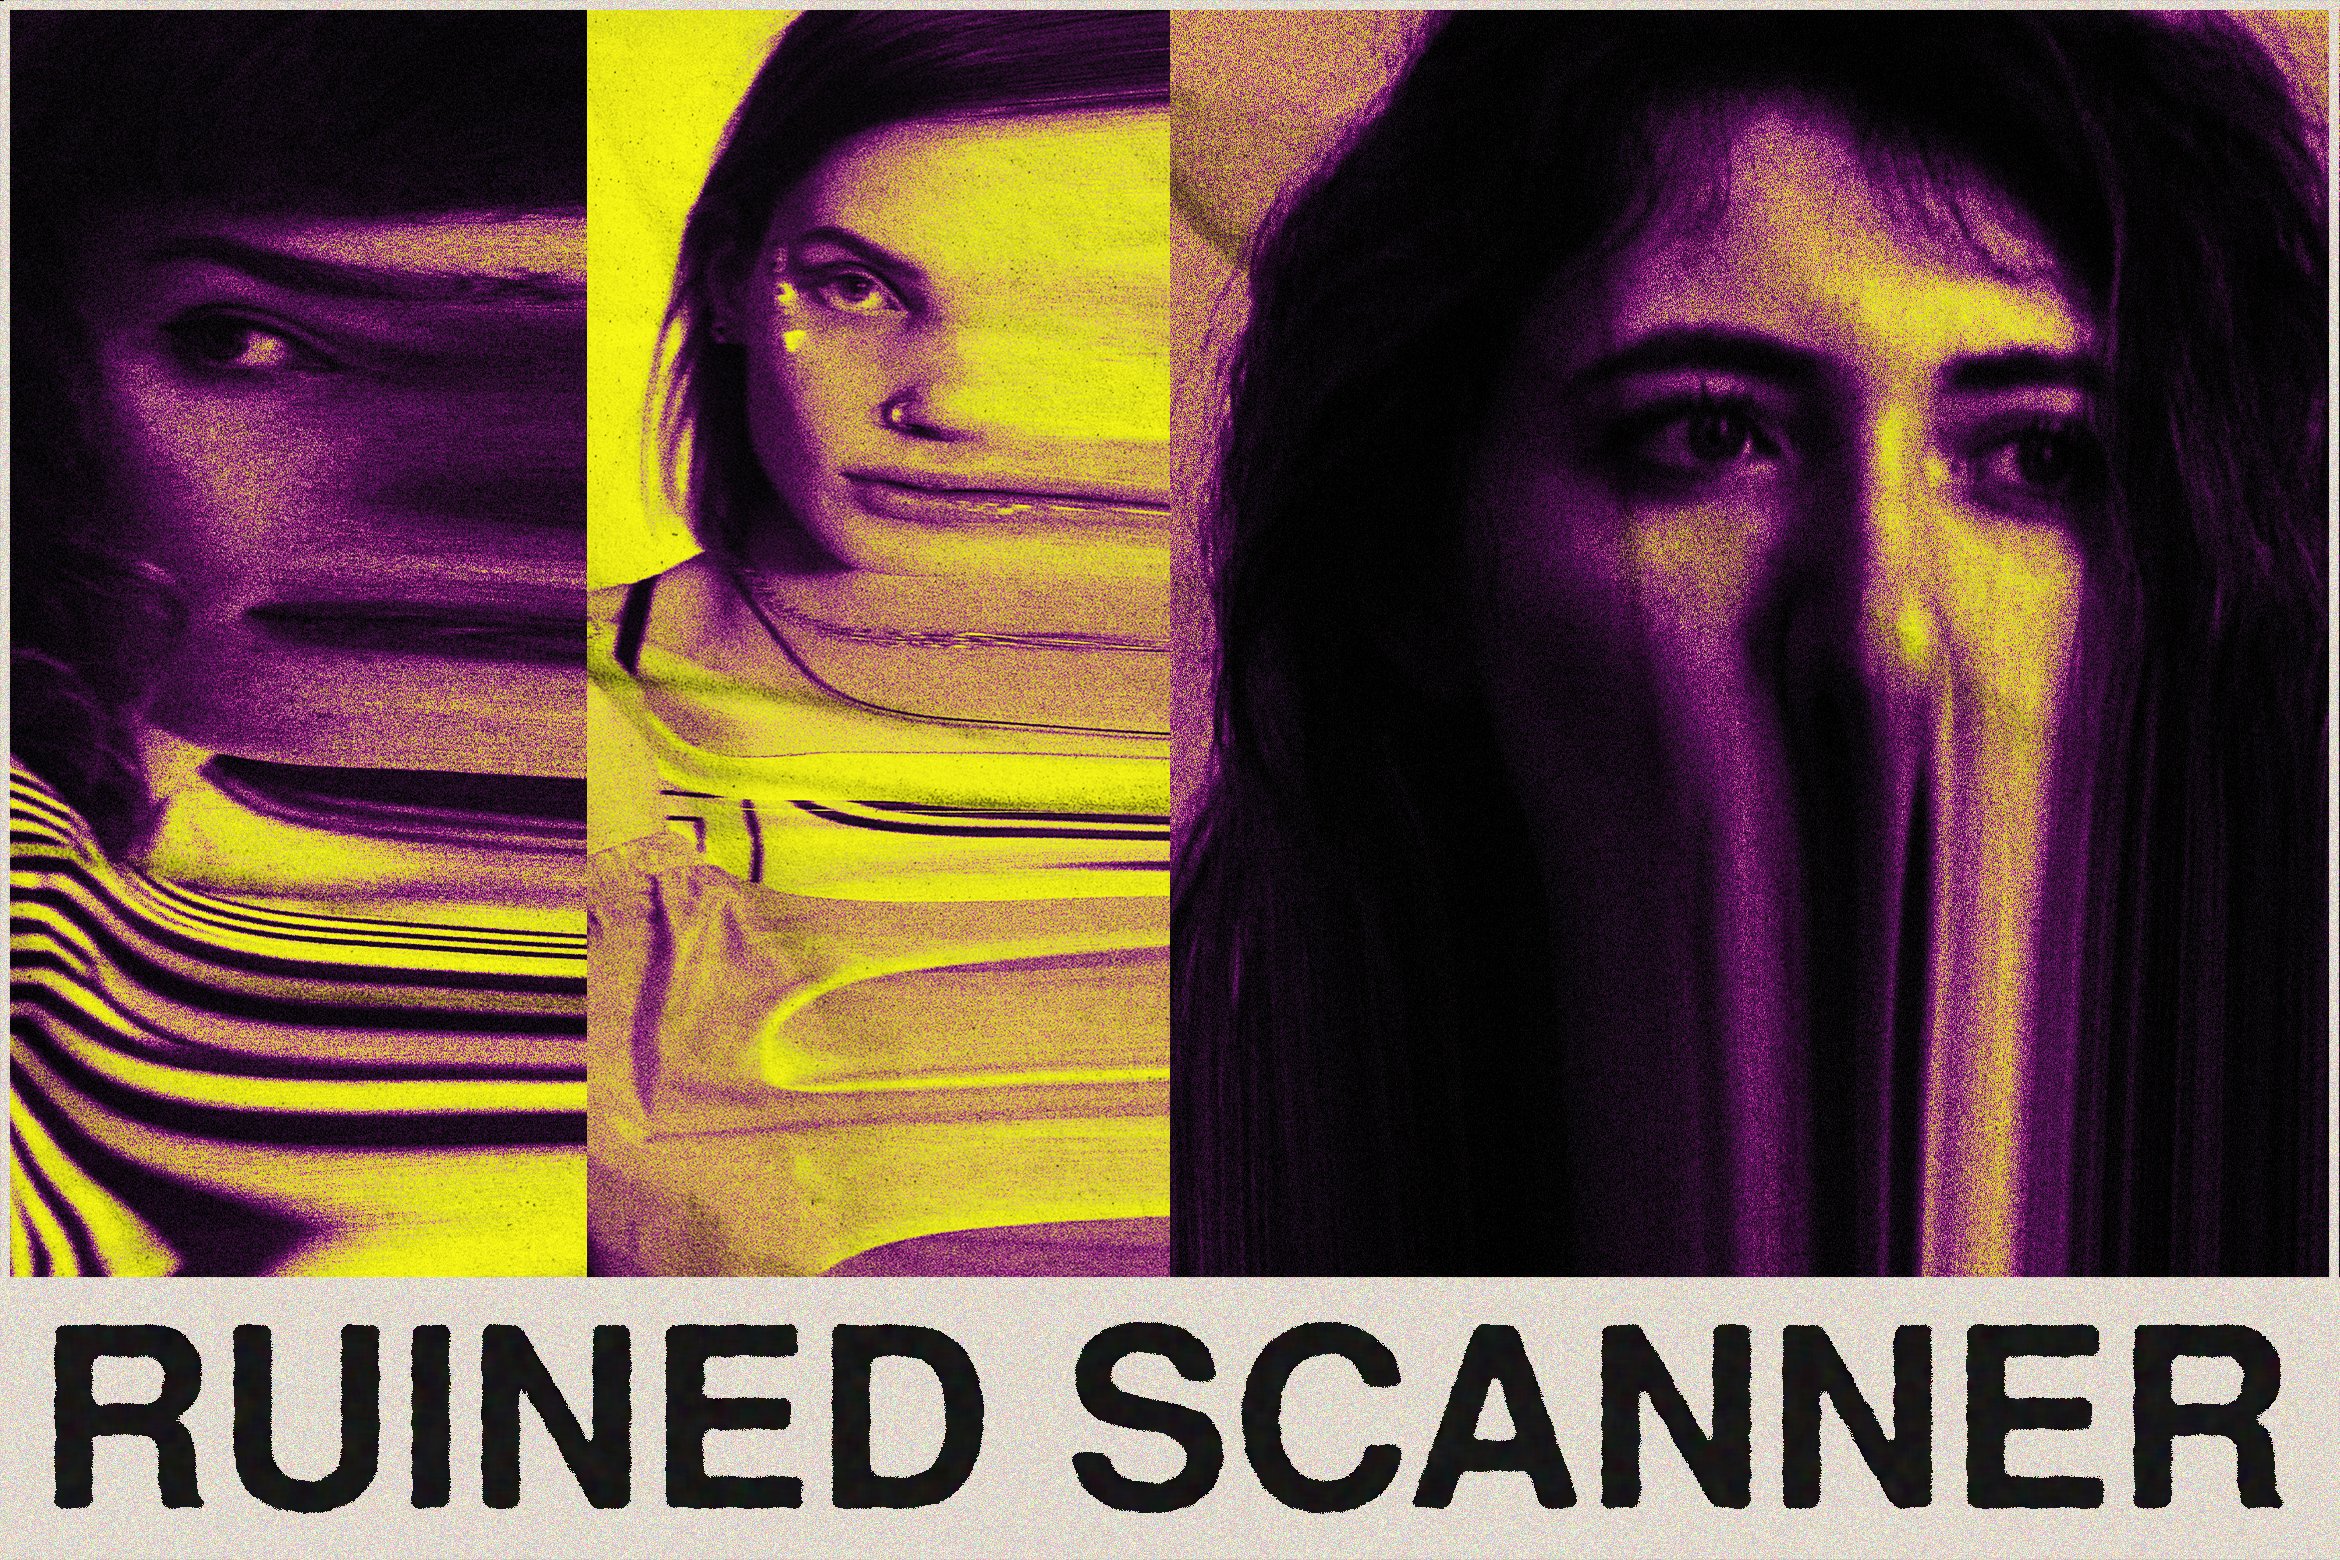 Ruined Scanner Photo Templatecover image.